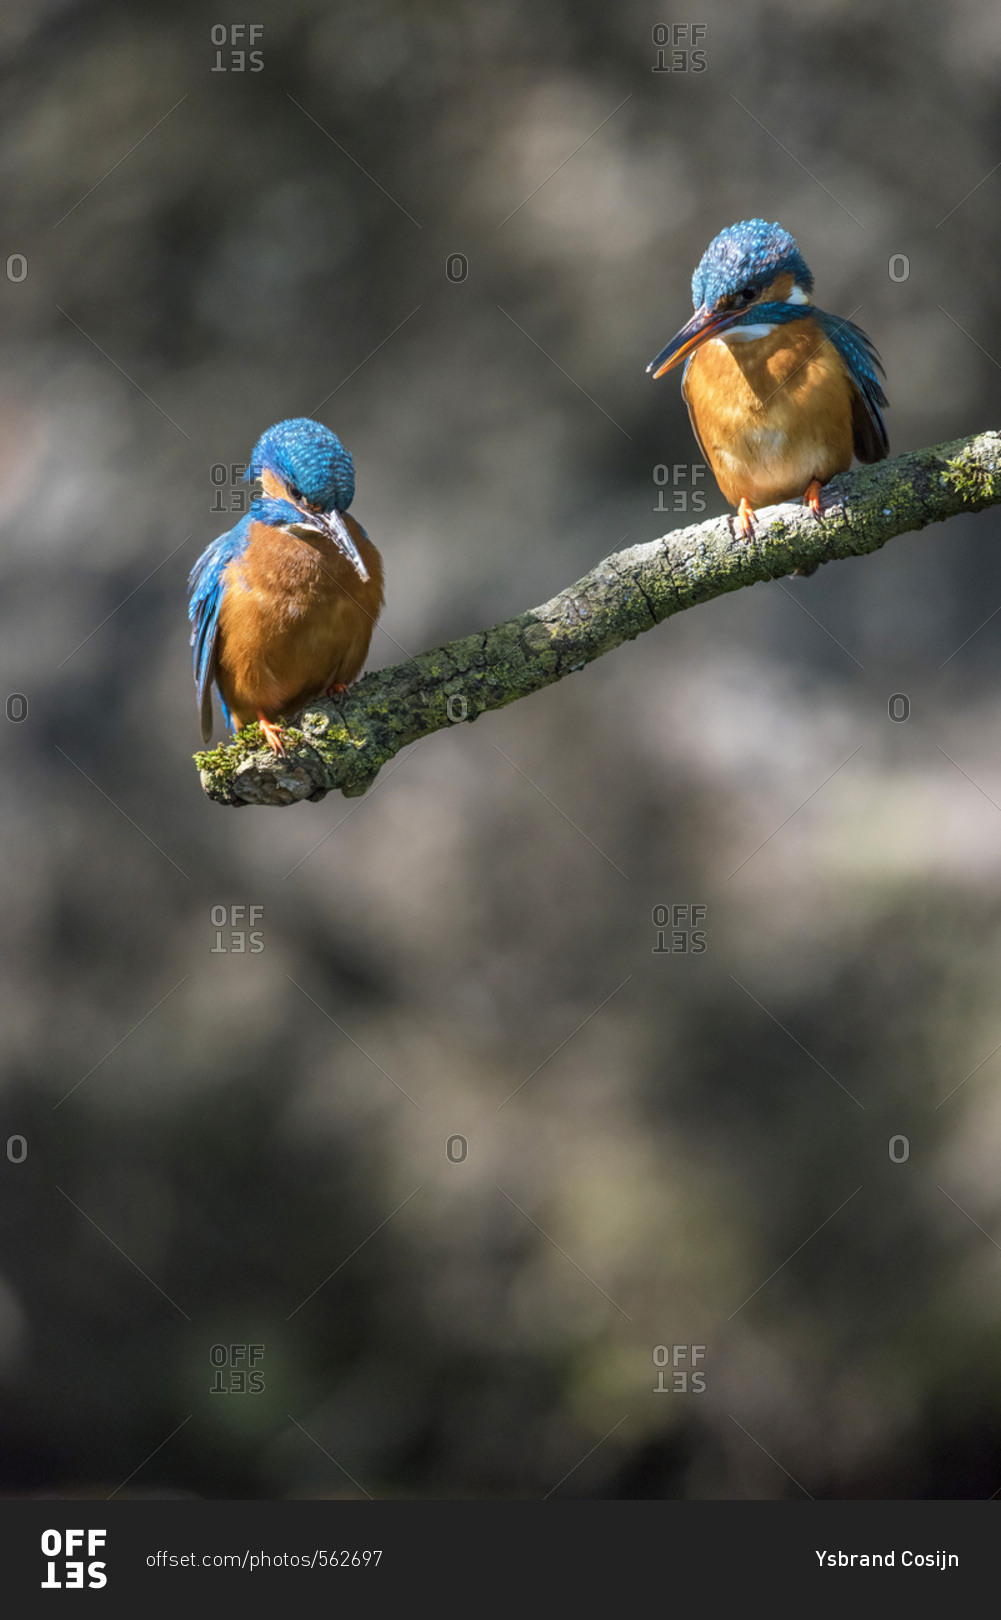 Two kingfisher birds perched on branch looking down into water for fish.